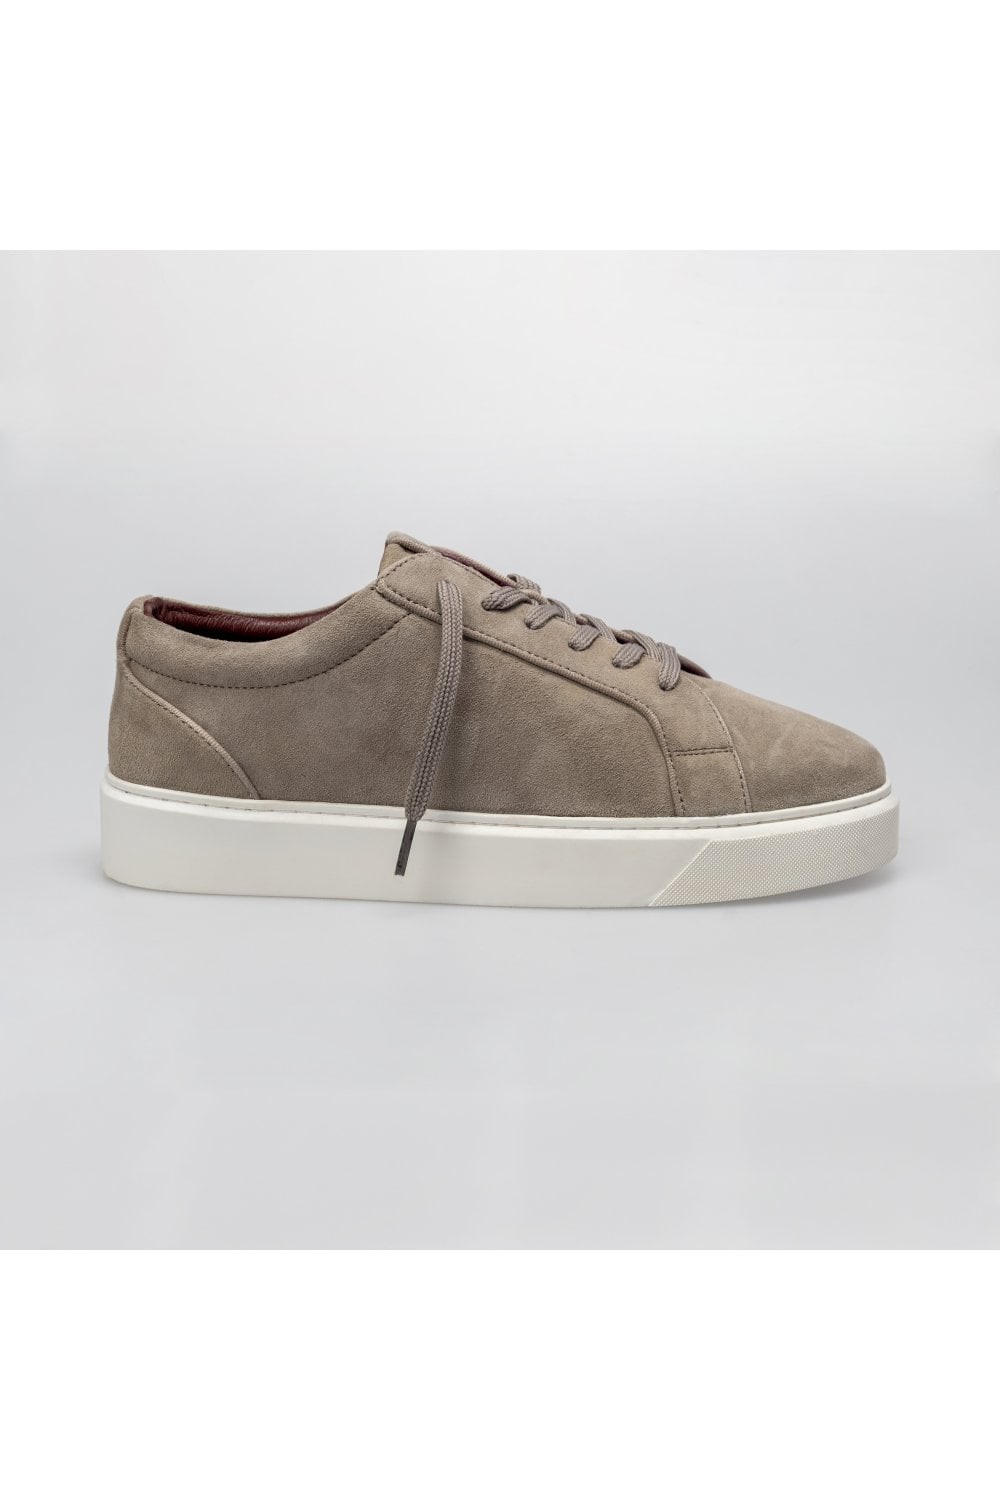 Men's Thick Rubber Sole Lace Up Sneakers - Stone Grey